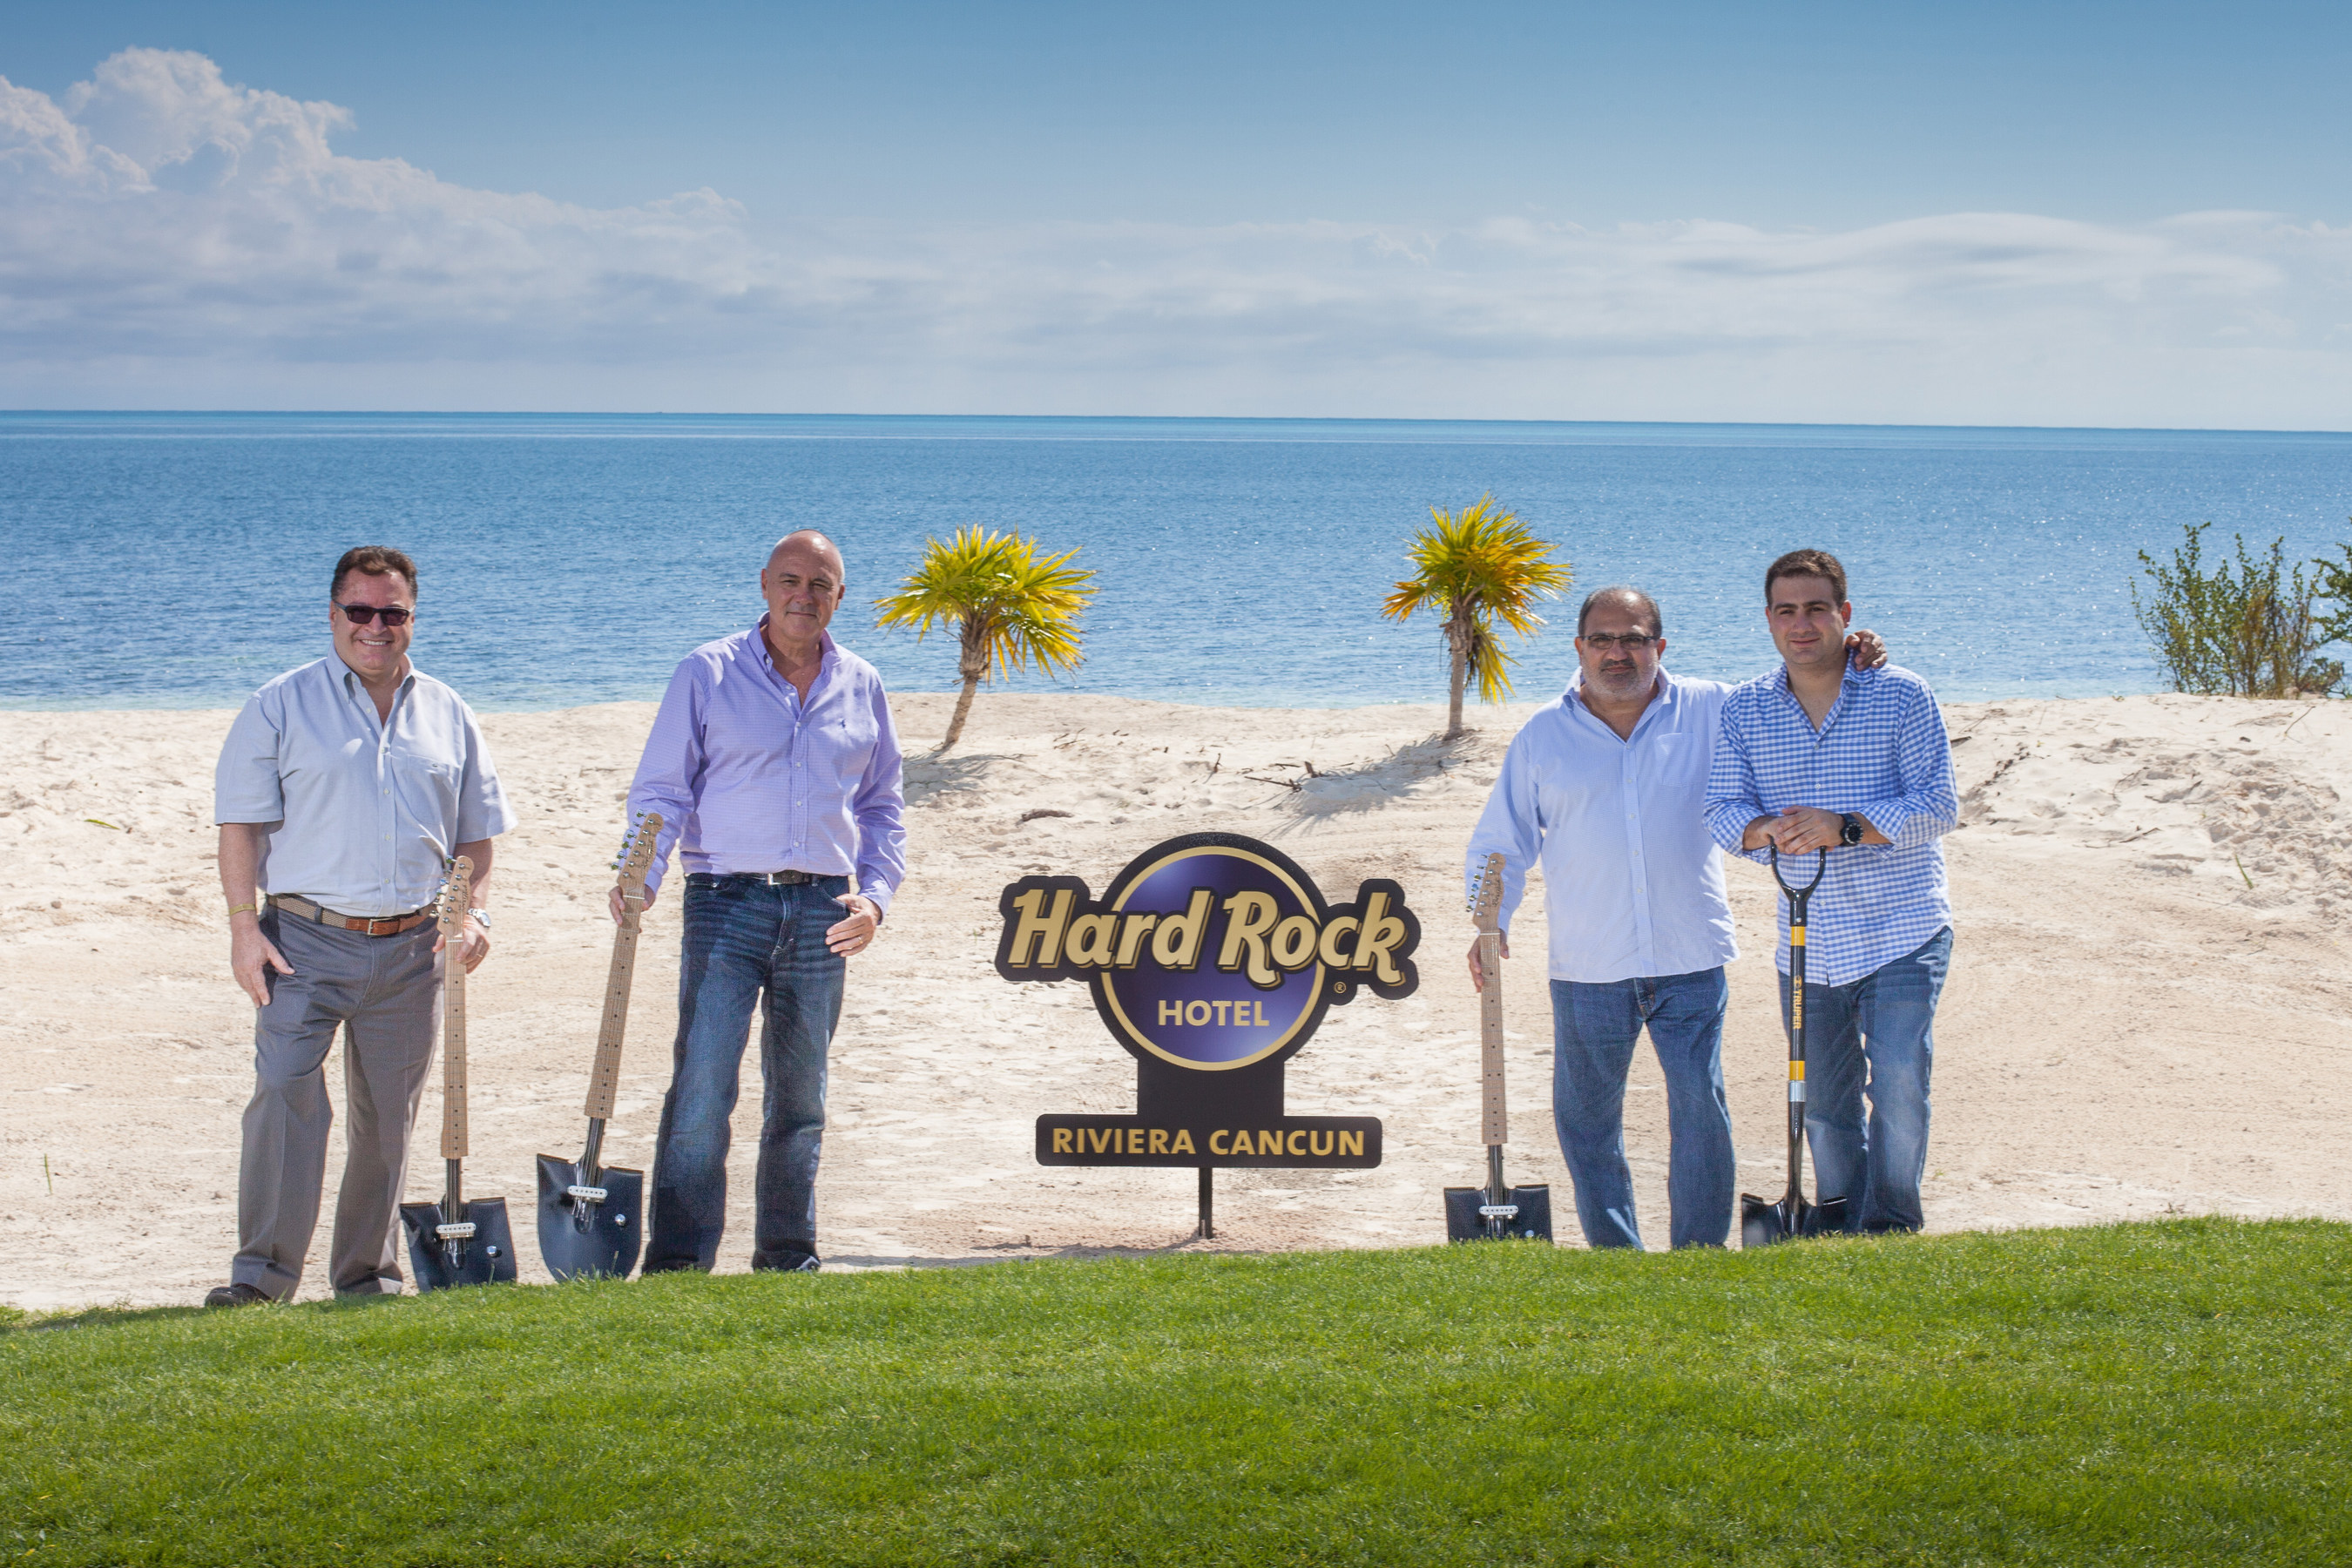 Hard Rock International Announce Hard Rock Hotel Riviera Cancun, An All-Inclusive Experience Set to Debut in Late-2017